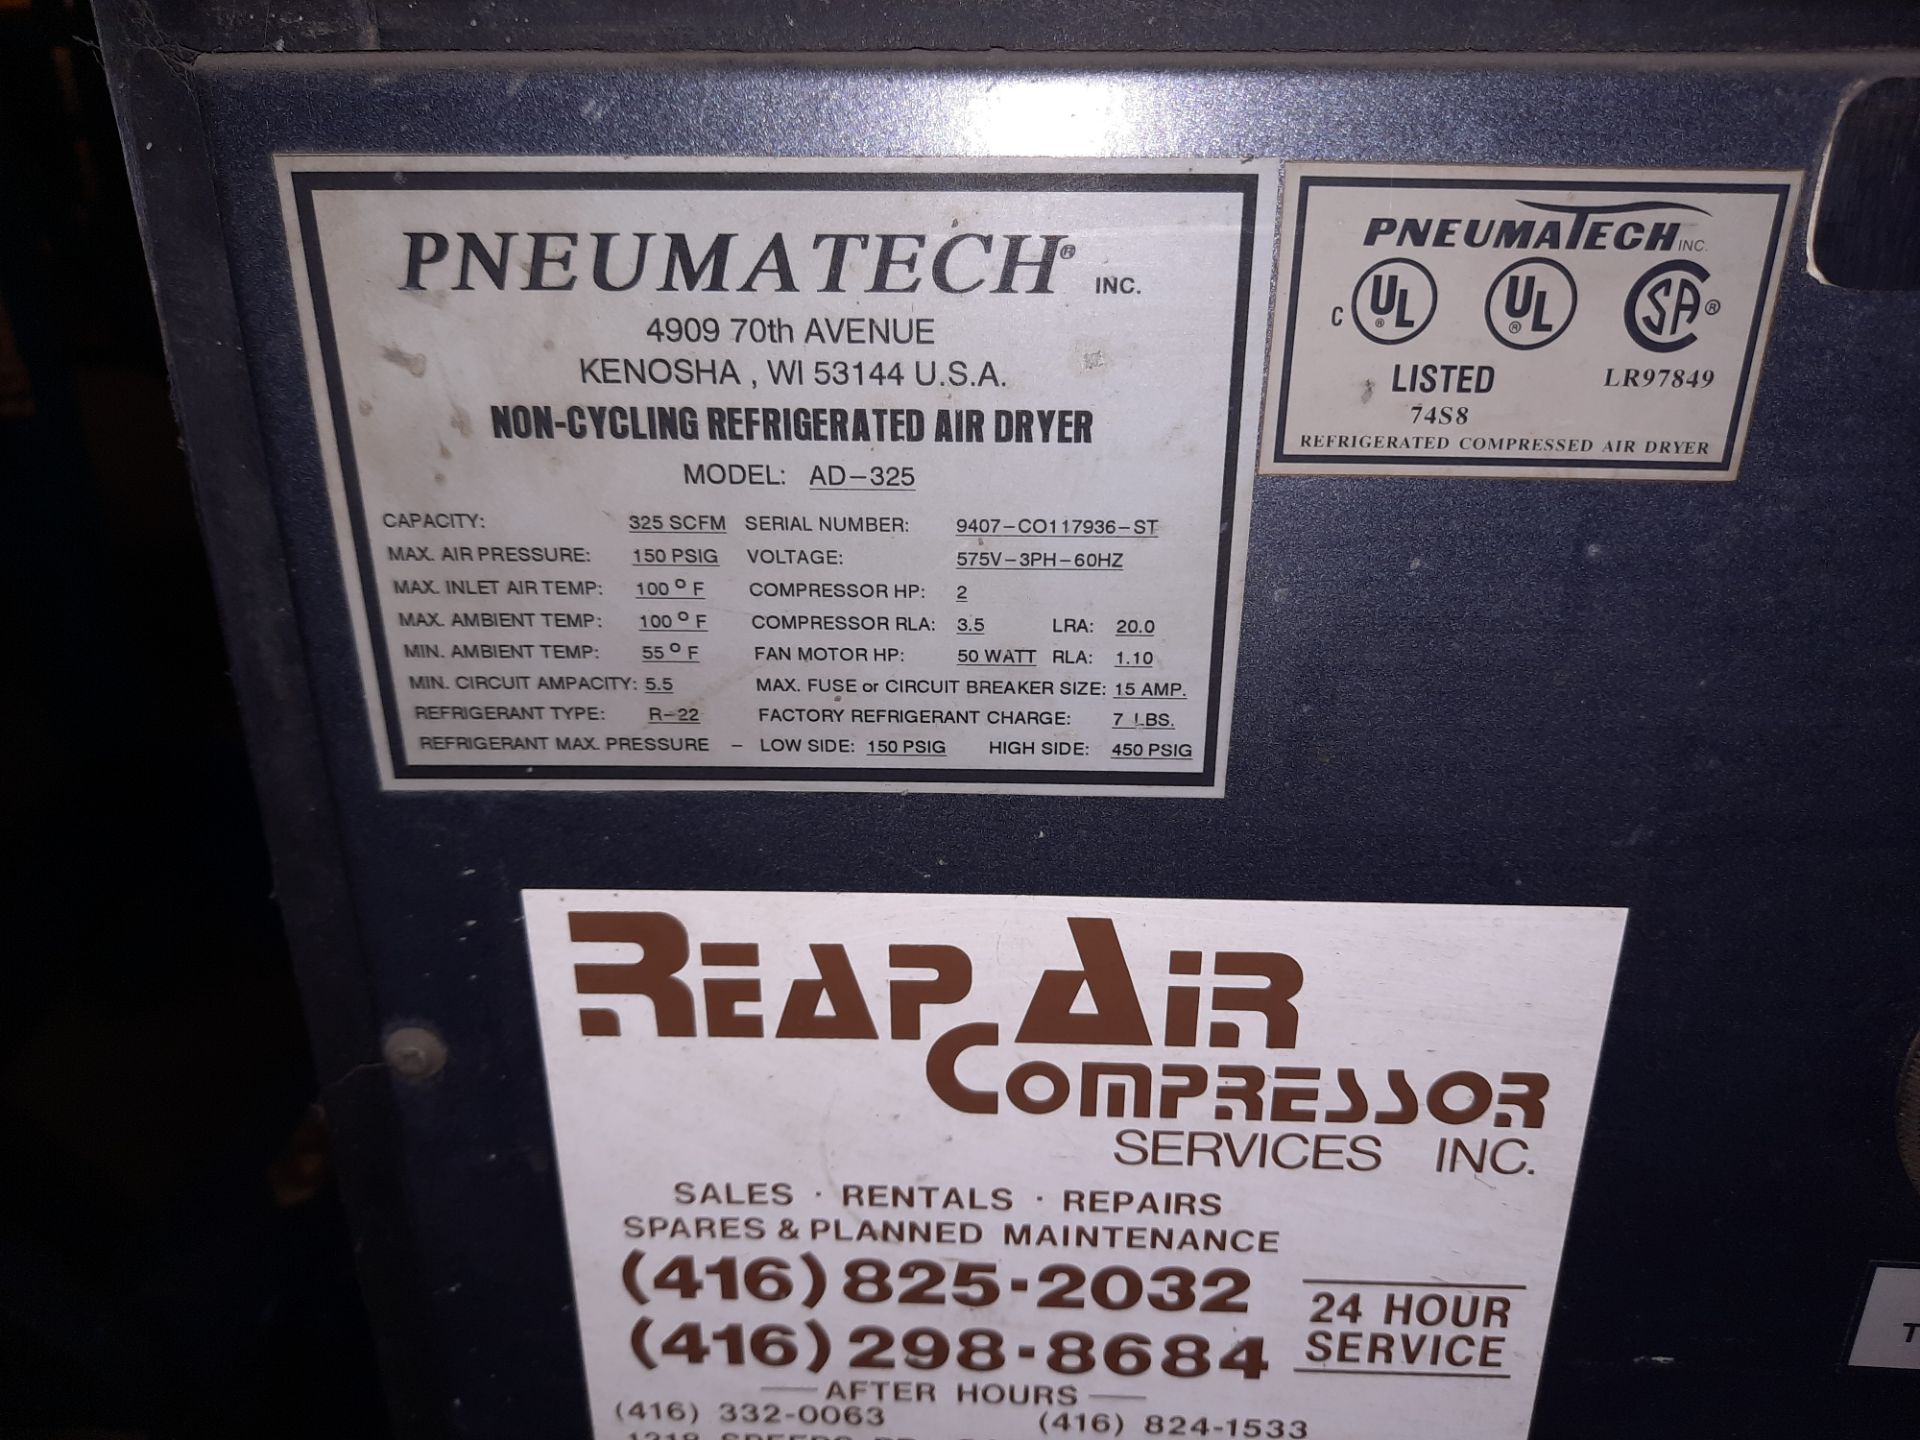 Pneumatech Compressed Air Dryer - Image 2 of 2